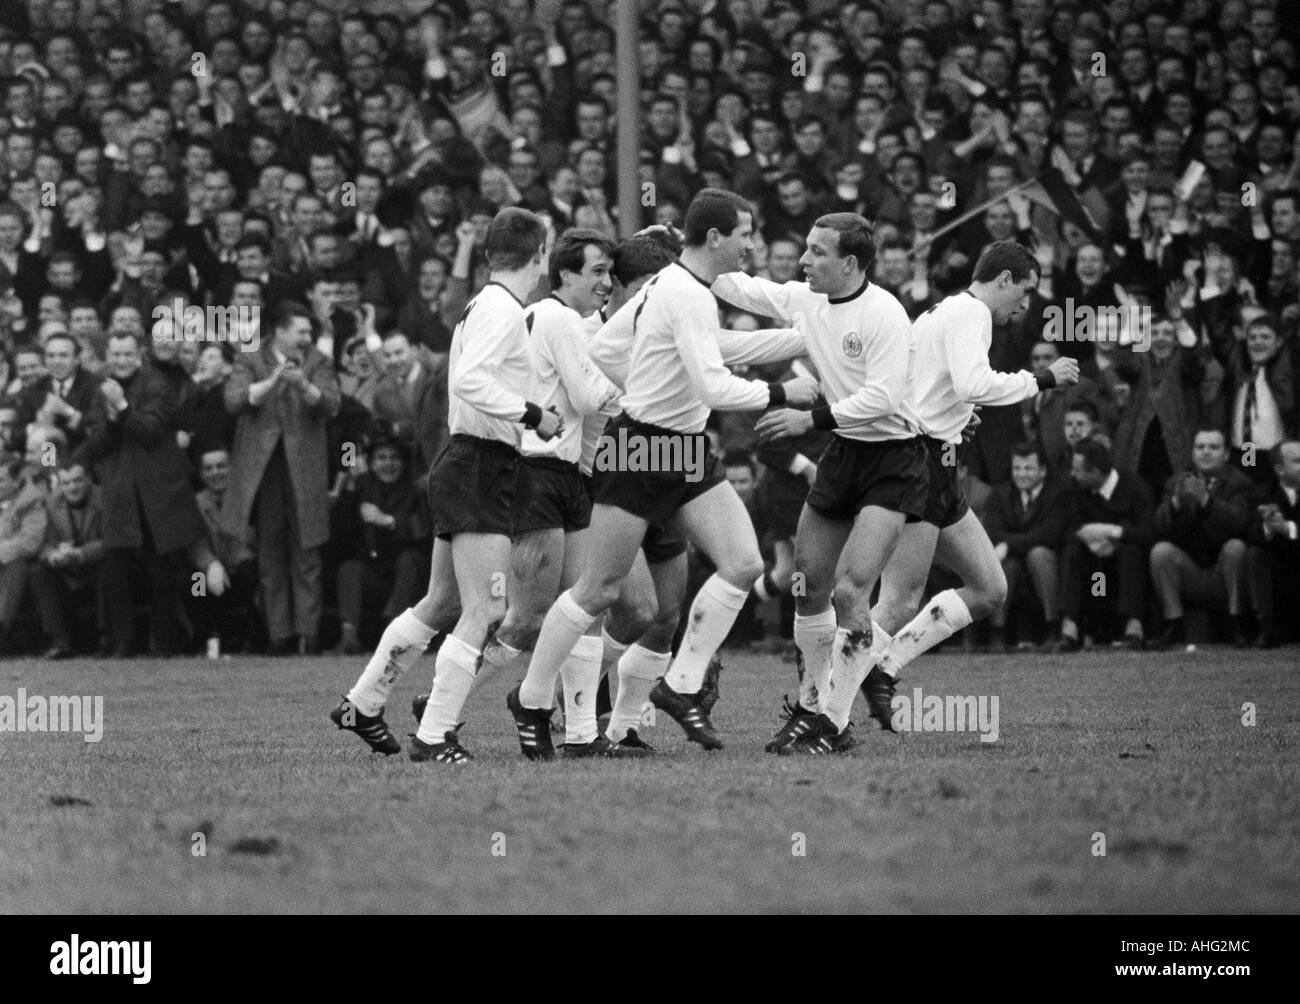 football, European championship 1968, qualifying round, group 4, Stadium Rote Erde in Dortmund, 1967, Germany against Albania 6:0, scene of the match, FRG players rejoicing at a goal, f.l.t.r. Wolfgang Overath (2.f.l.), Lothar Ulsass, Horst Dieter Hoettge Stock Photo